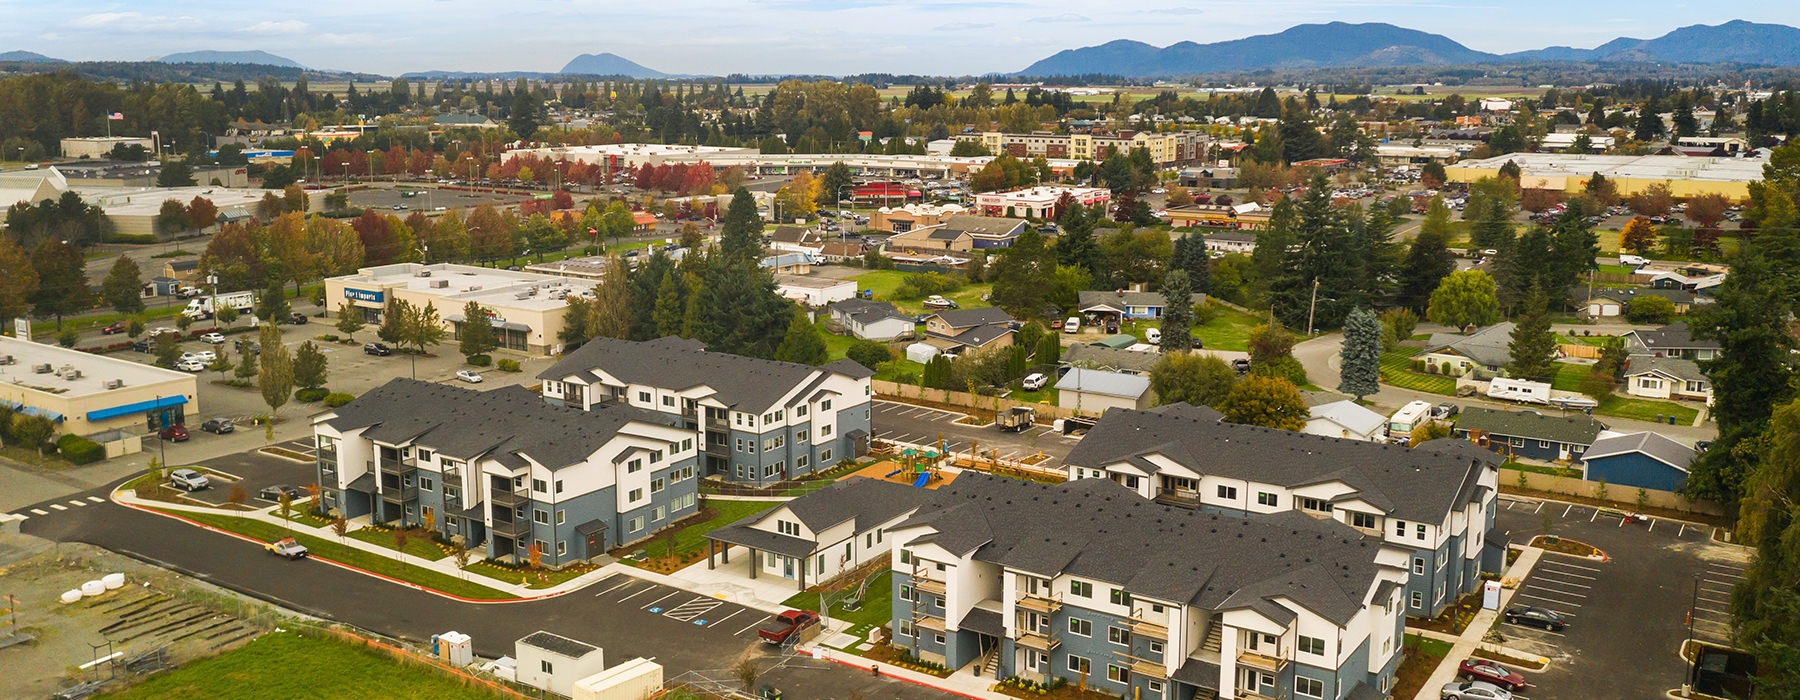 aerial rendering of Four Pines Apartments